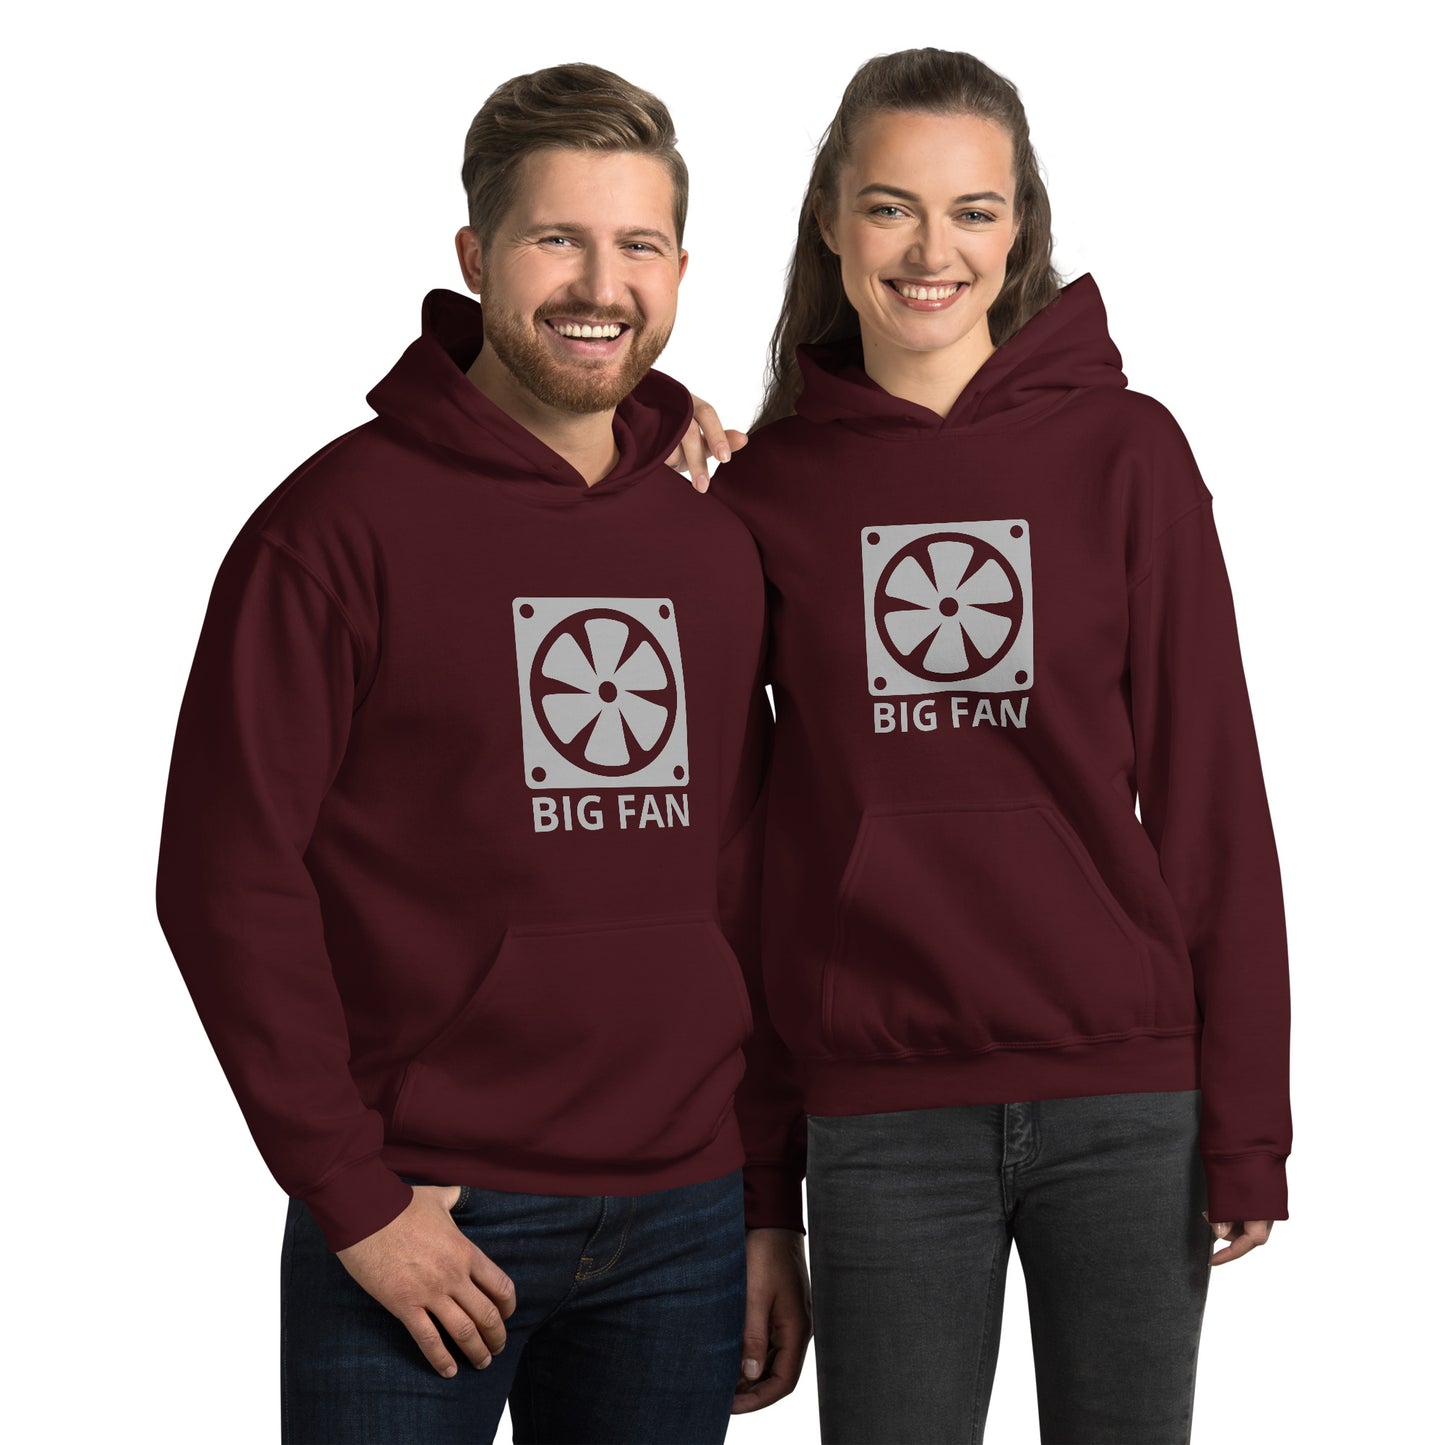 Man and women with maroon hoodie with image of a big computer fan and the text "BIG FAN"